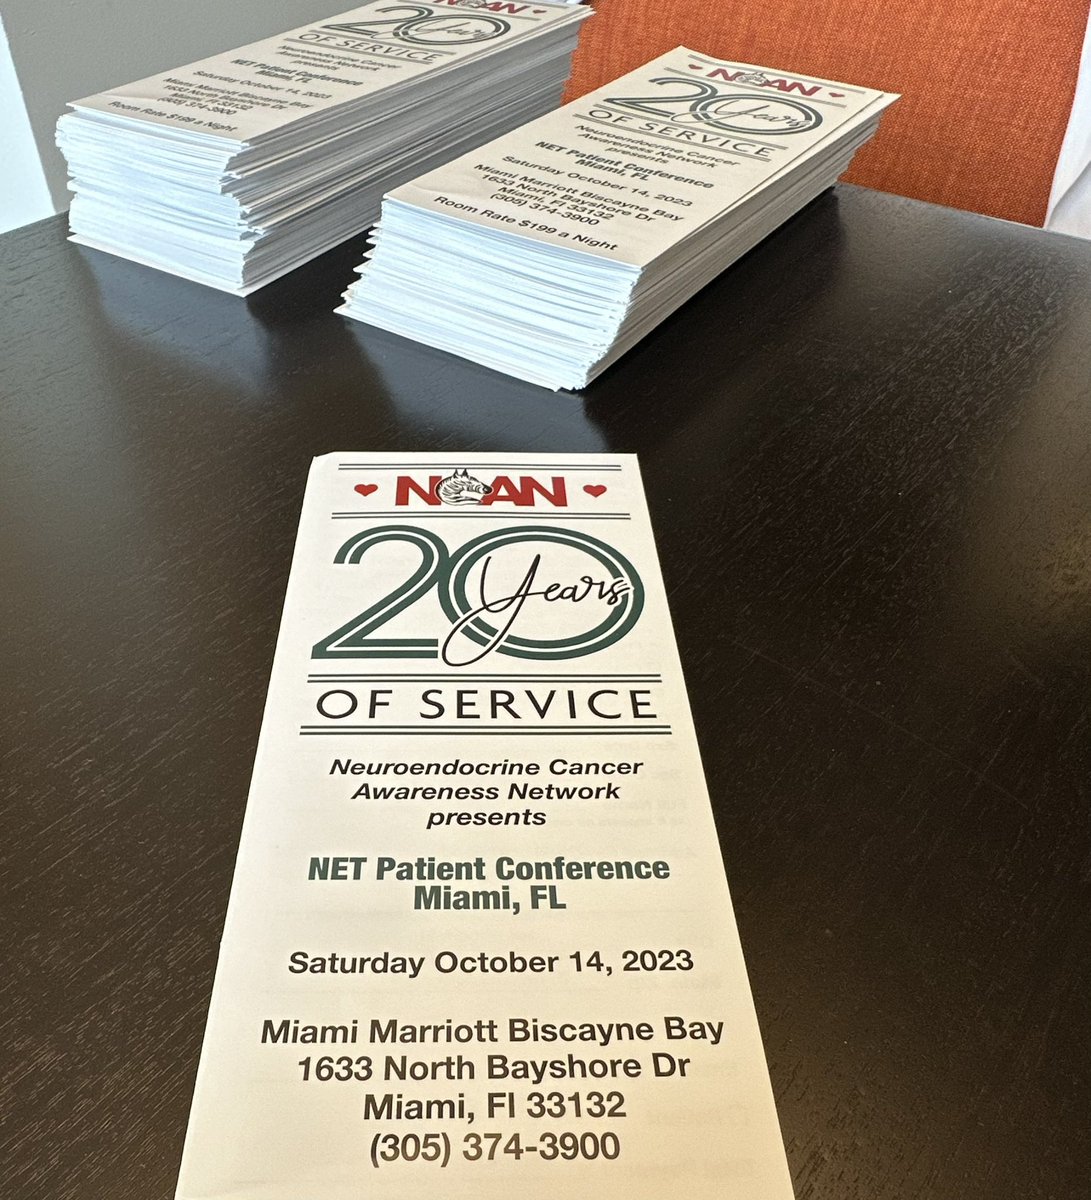 After consenting 1st patient on ETCTN 10450 exp cohort last week, we consented a pt on Paltusotine Study today. Tomorrow we are consenting two pts on #PRRT study. So gratifying to be part of clinical research 🙏 to patients. ➡️1st Miami NET patient conference brochures are here🦓